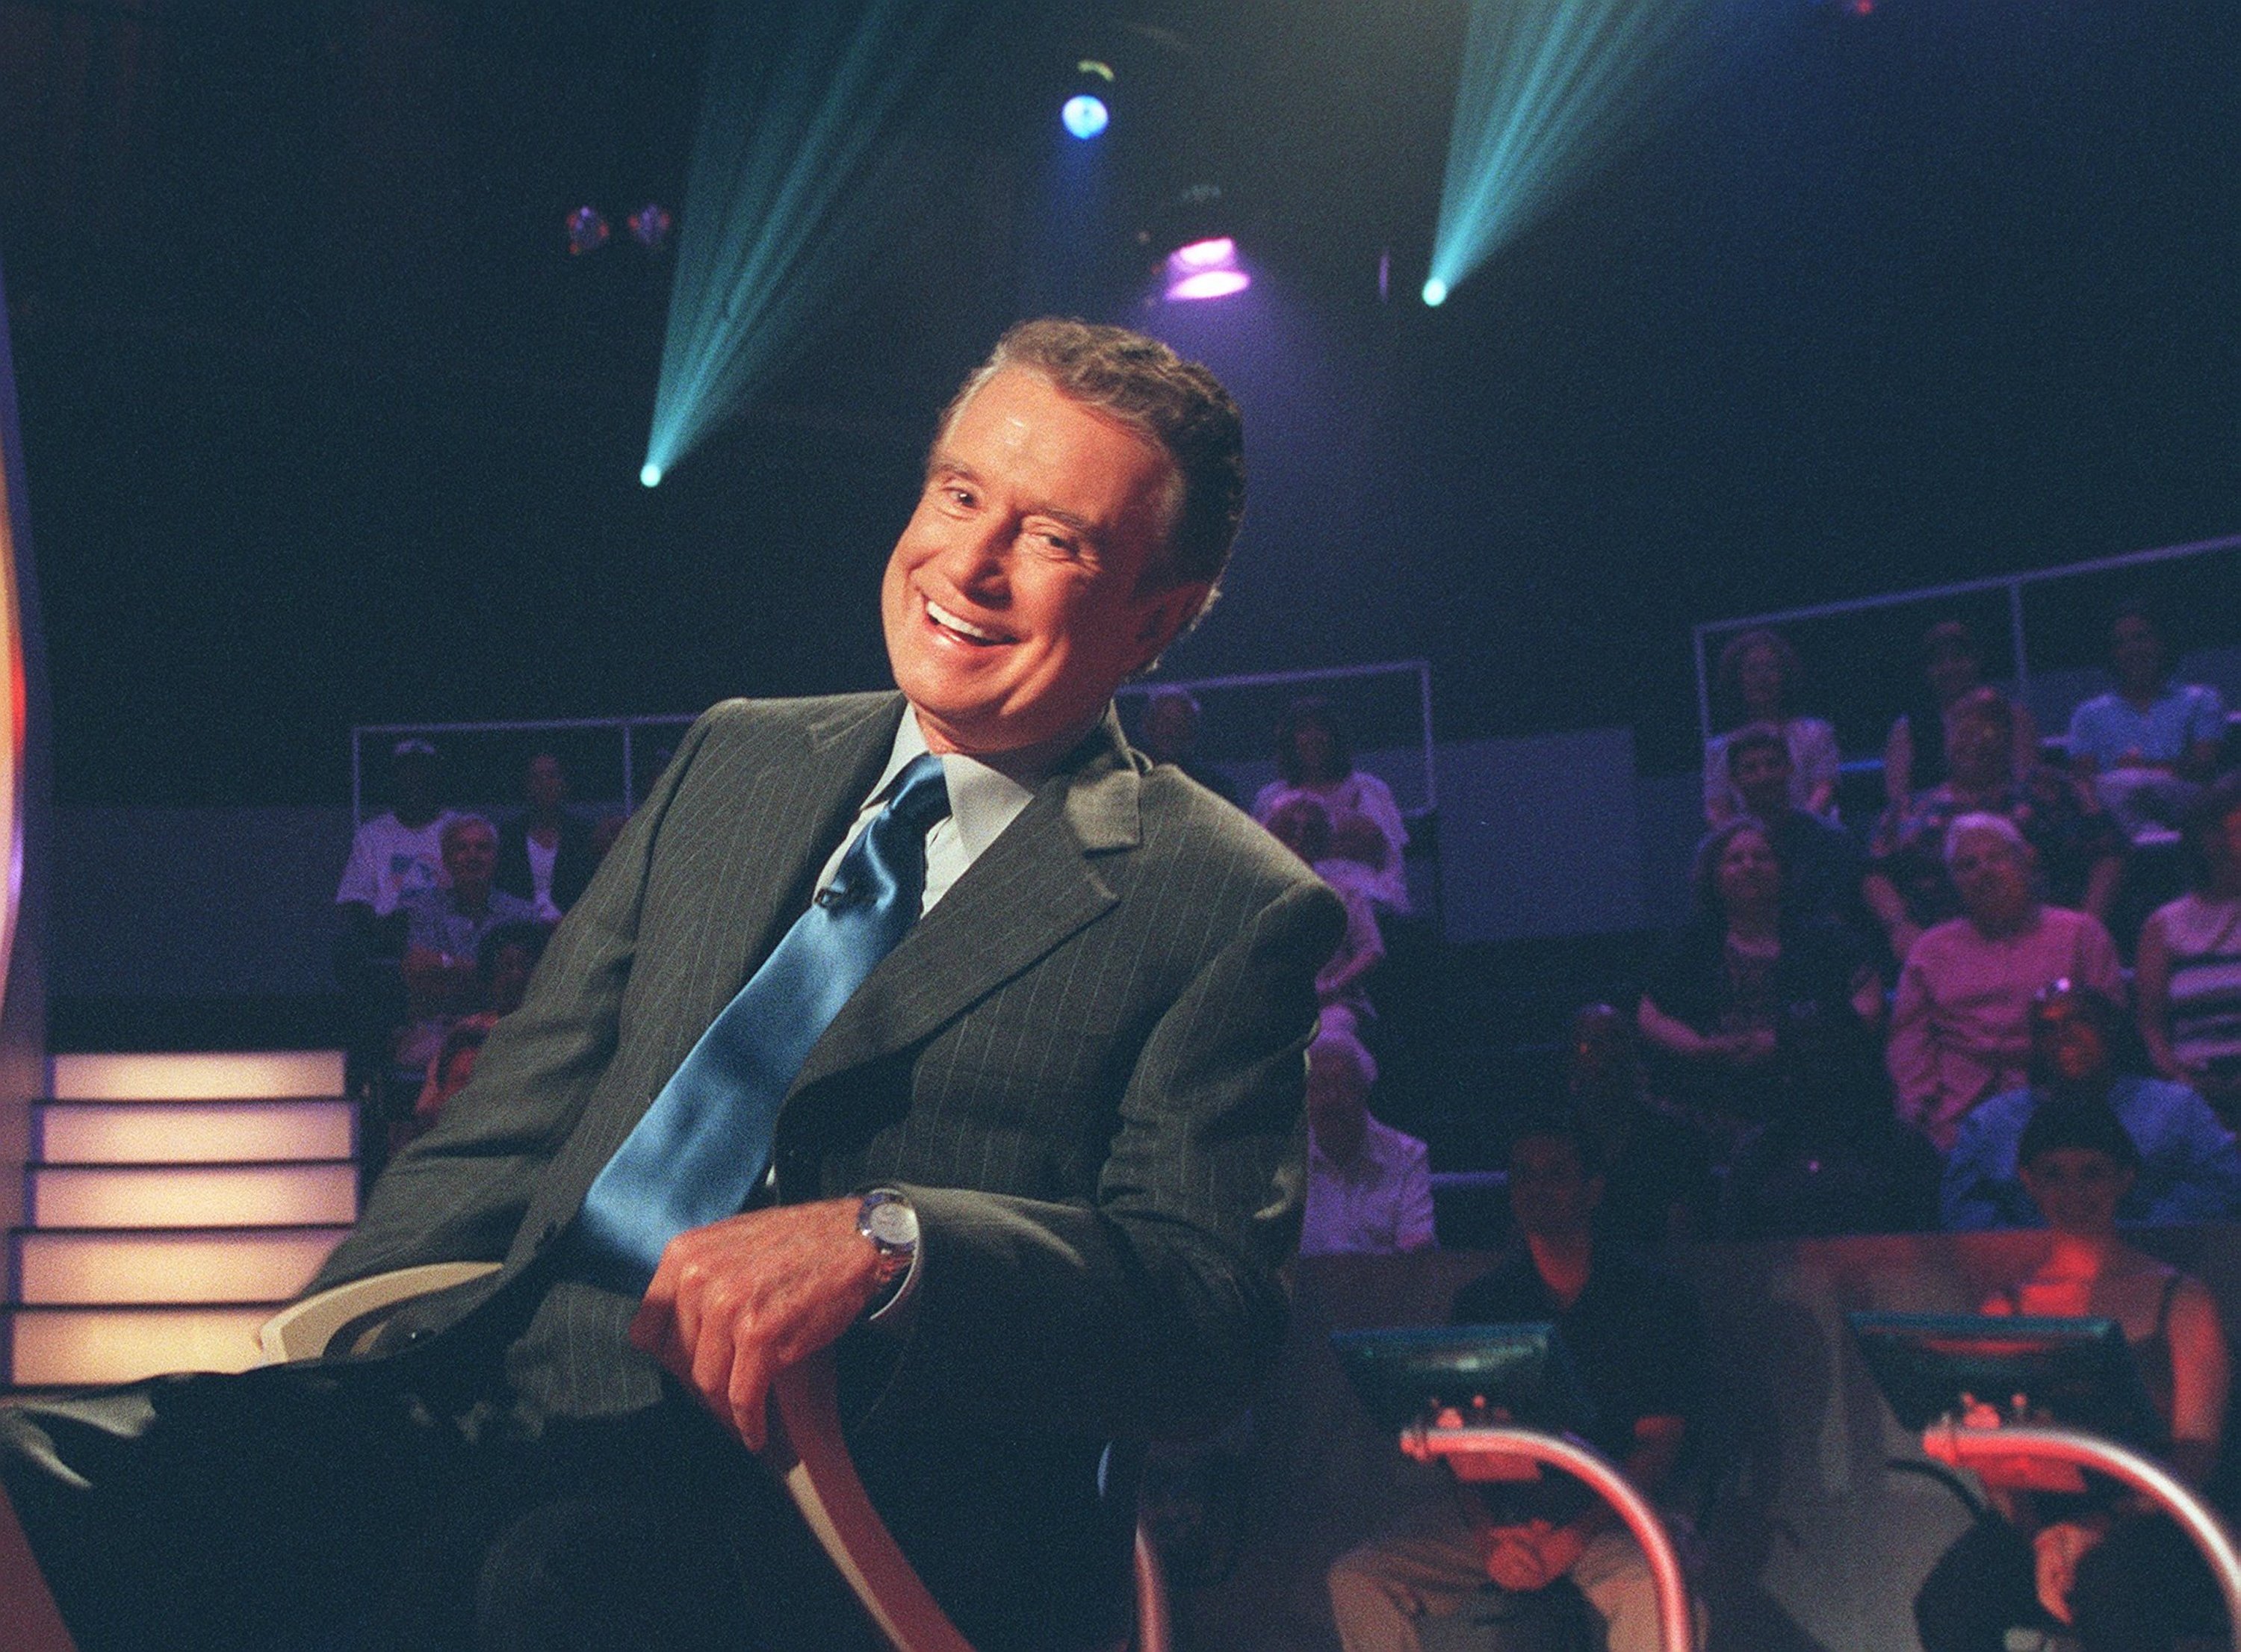 Regis Philbin on the set of 'Who Wants To Be A Millionaire?' in 1999